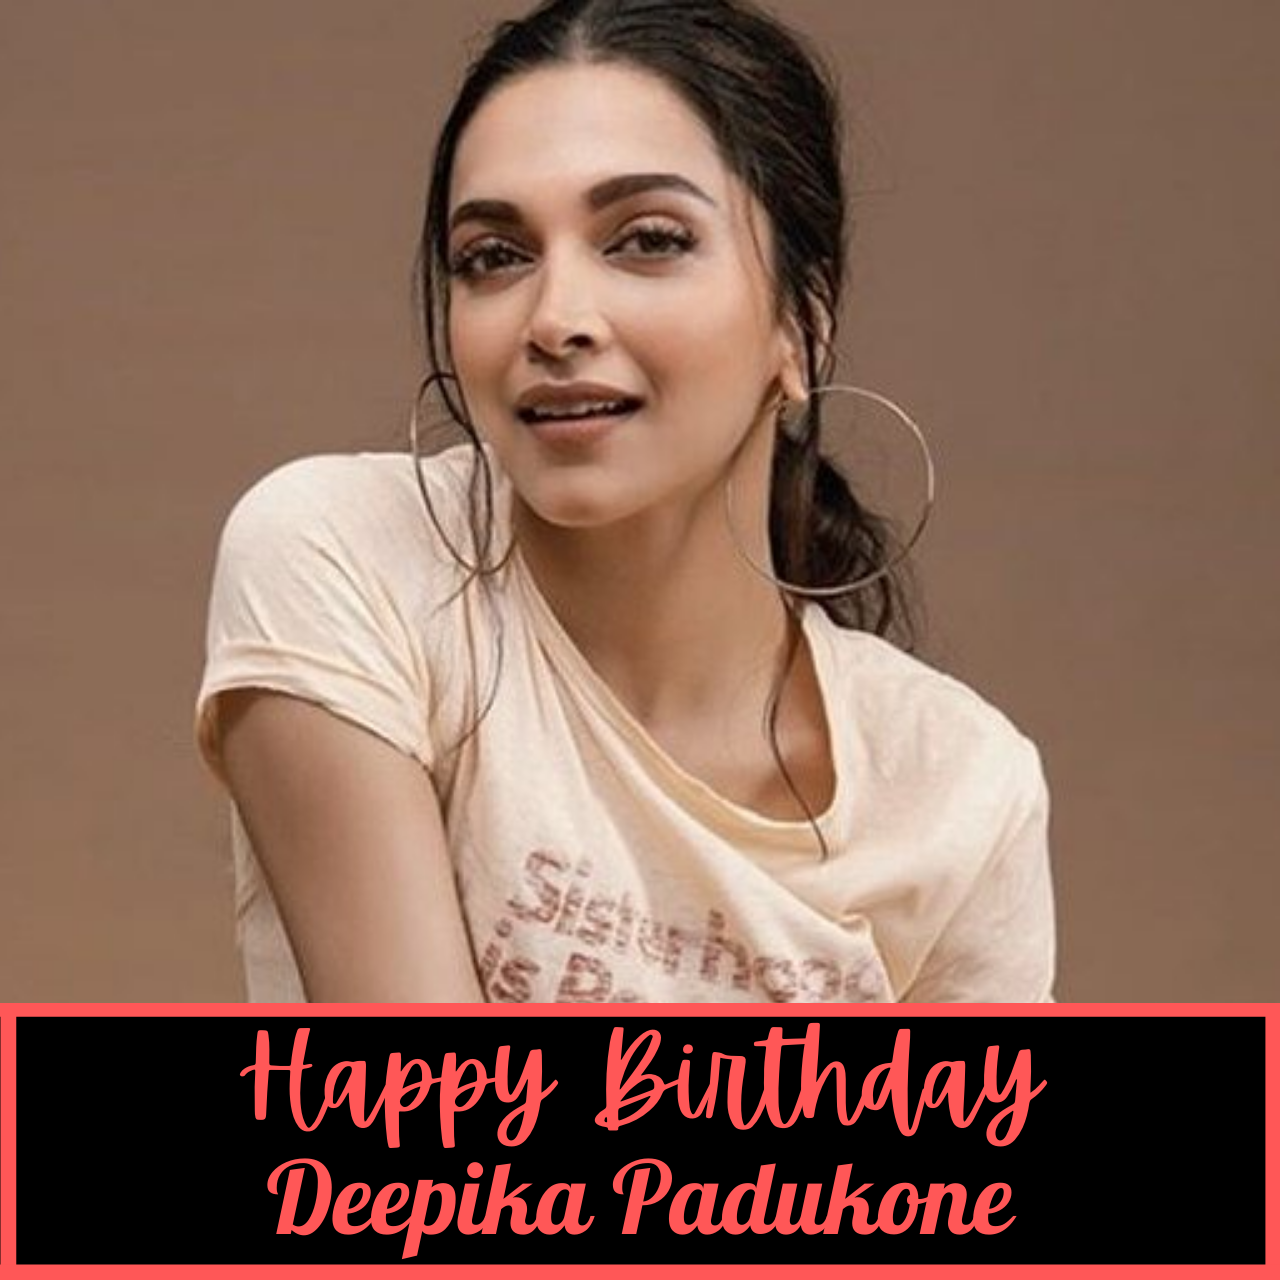 Happy Birthday Deepika Padukone: Wishes, HD Images, Greetings, Quotes to greet Deepz